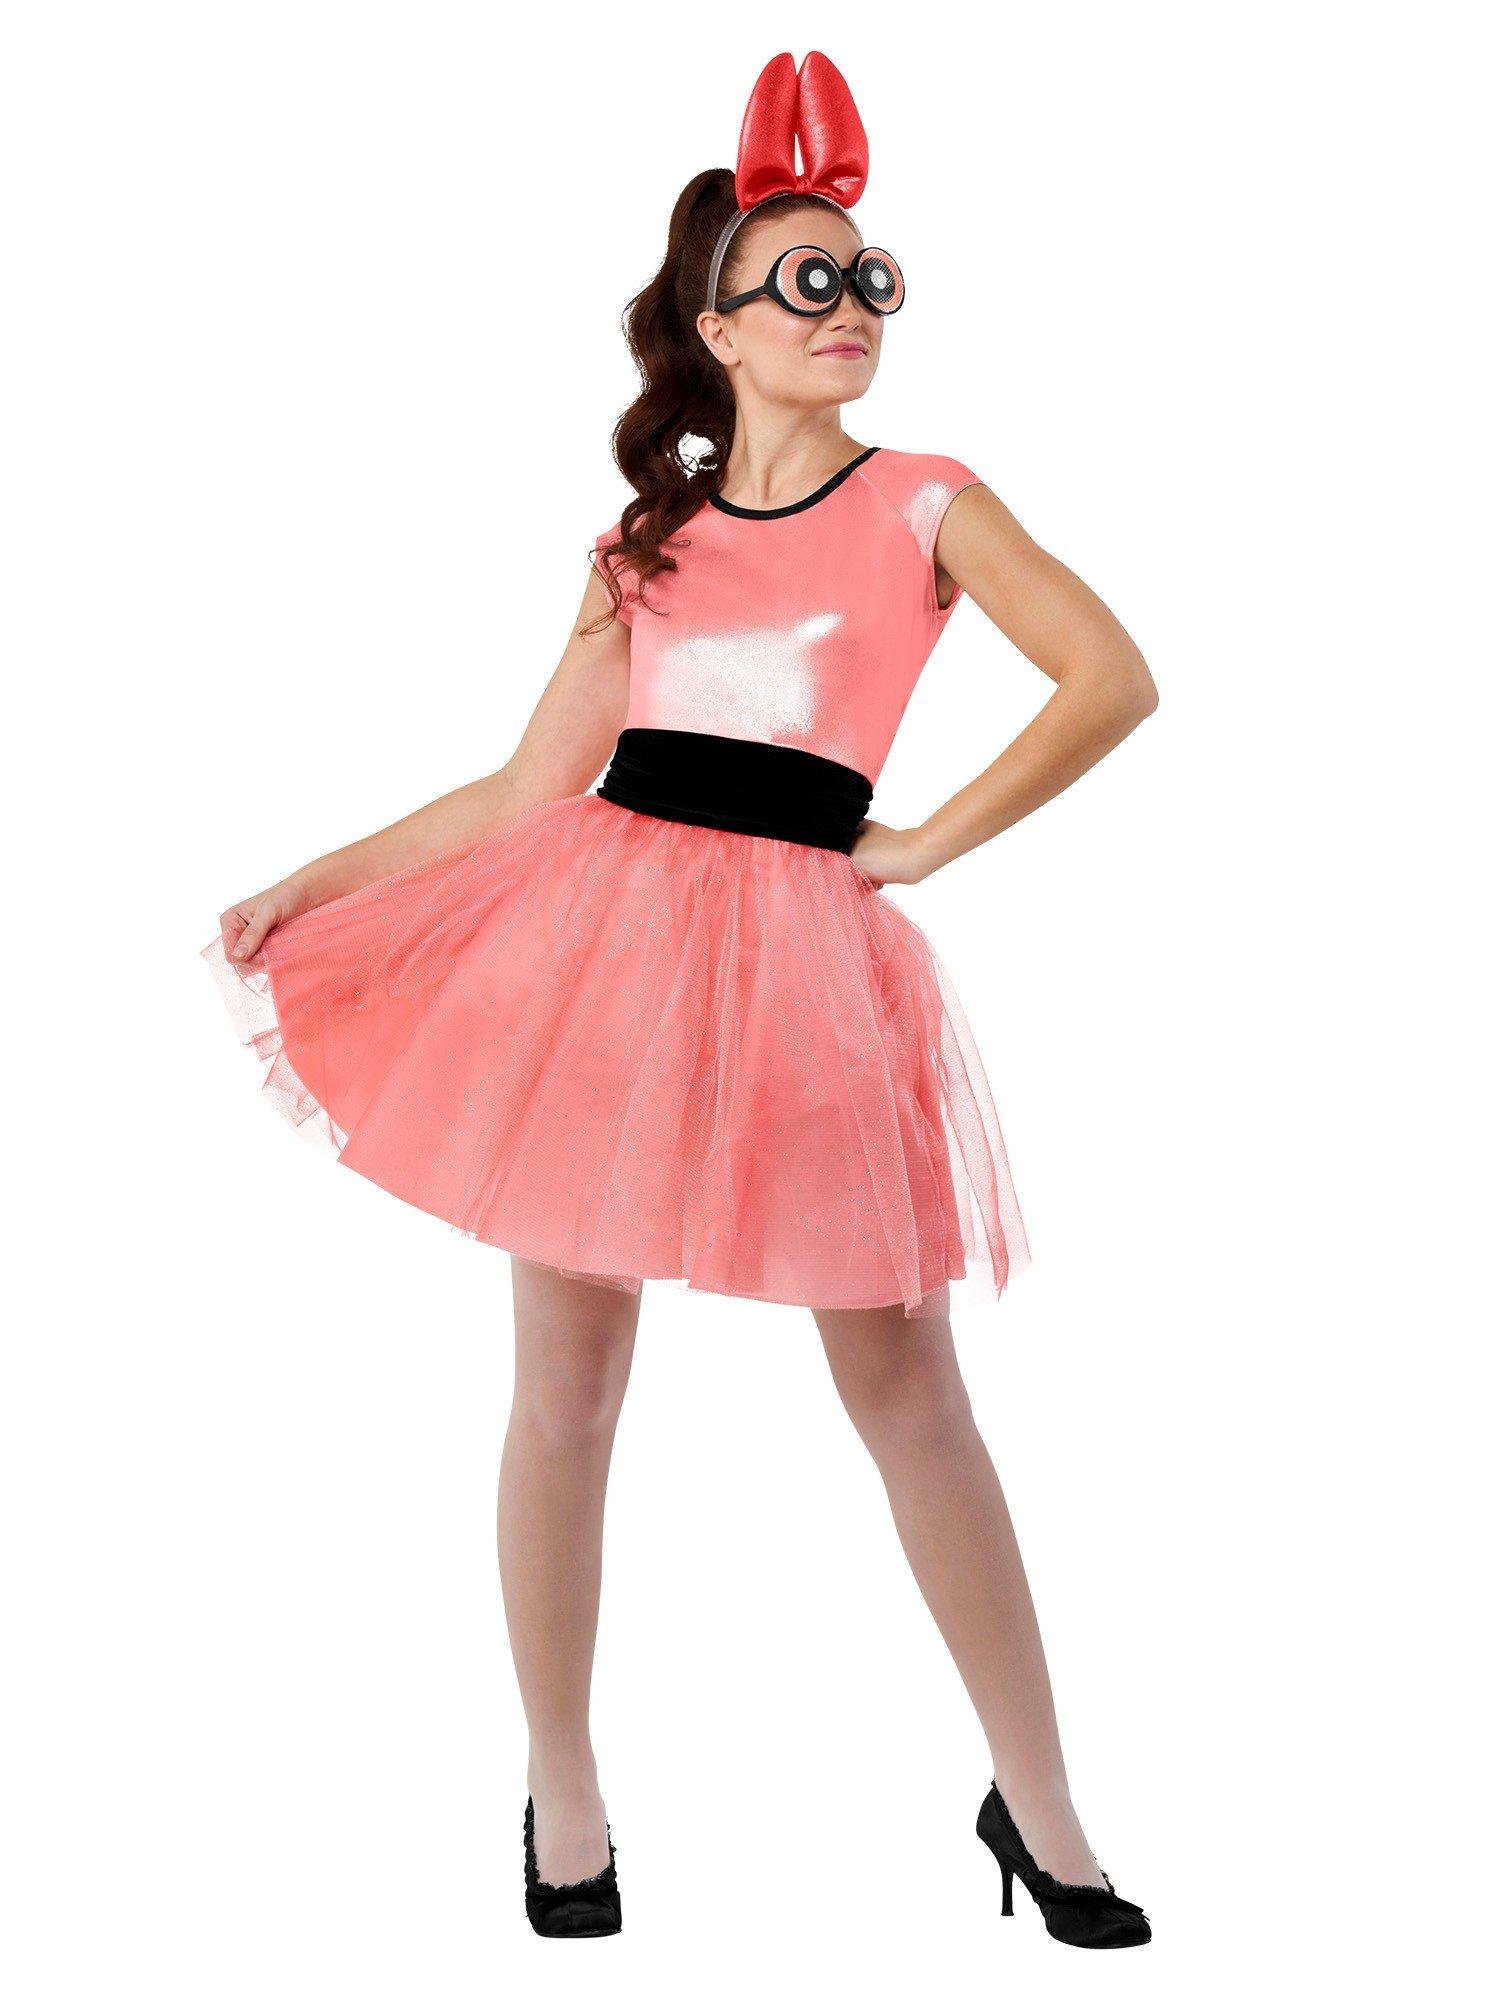 Powerpuff Girls Dress Up  Play Now Online for Free 